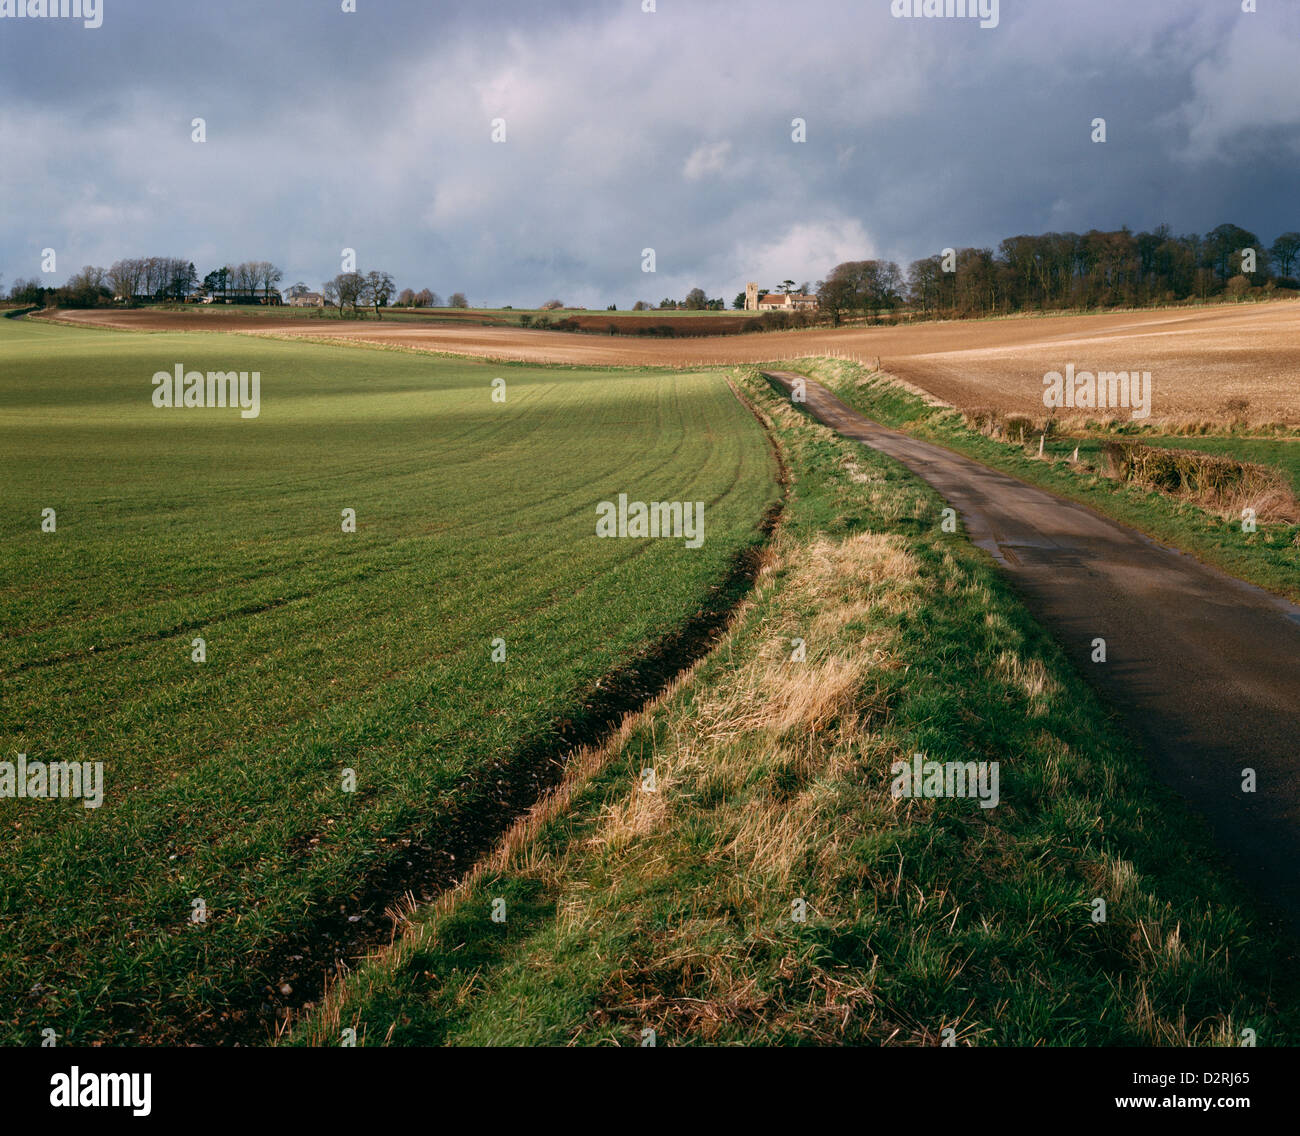 Winter downland landscape with road between arable fields, south of Farnborough, Berkshire, England, UK Stock Photo